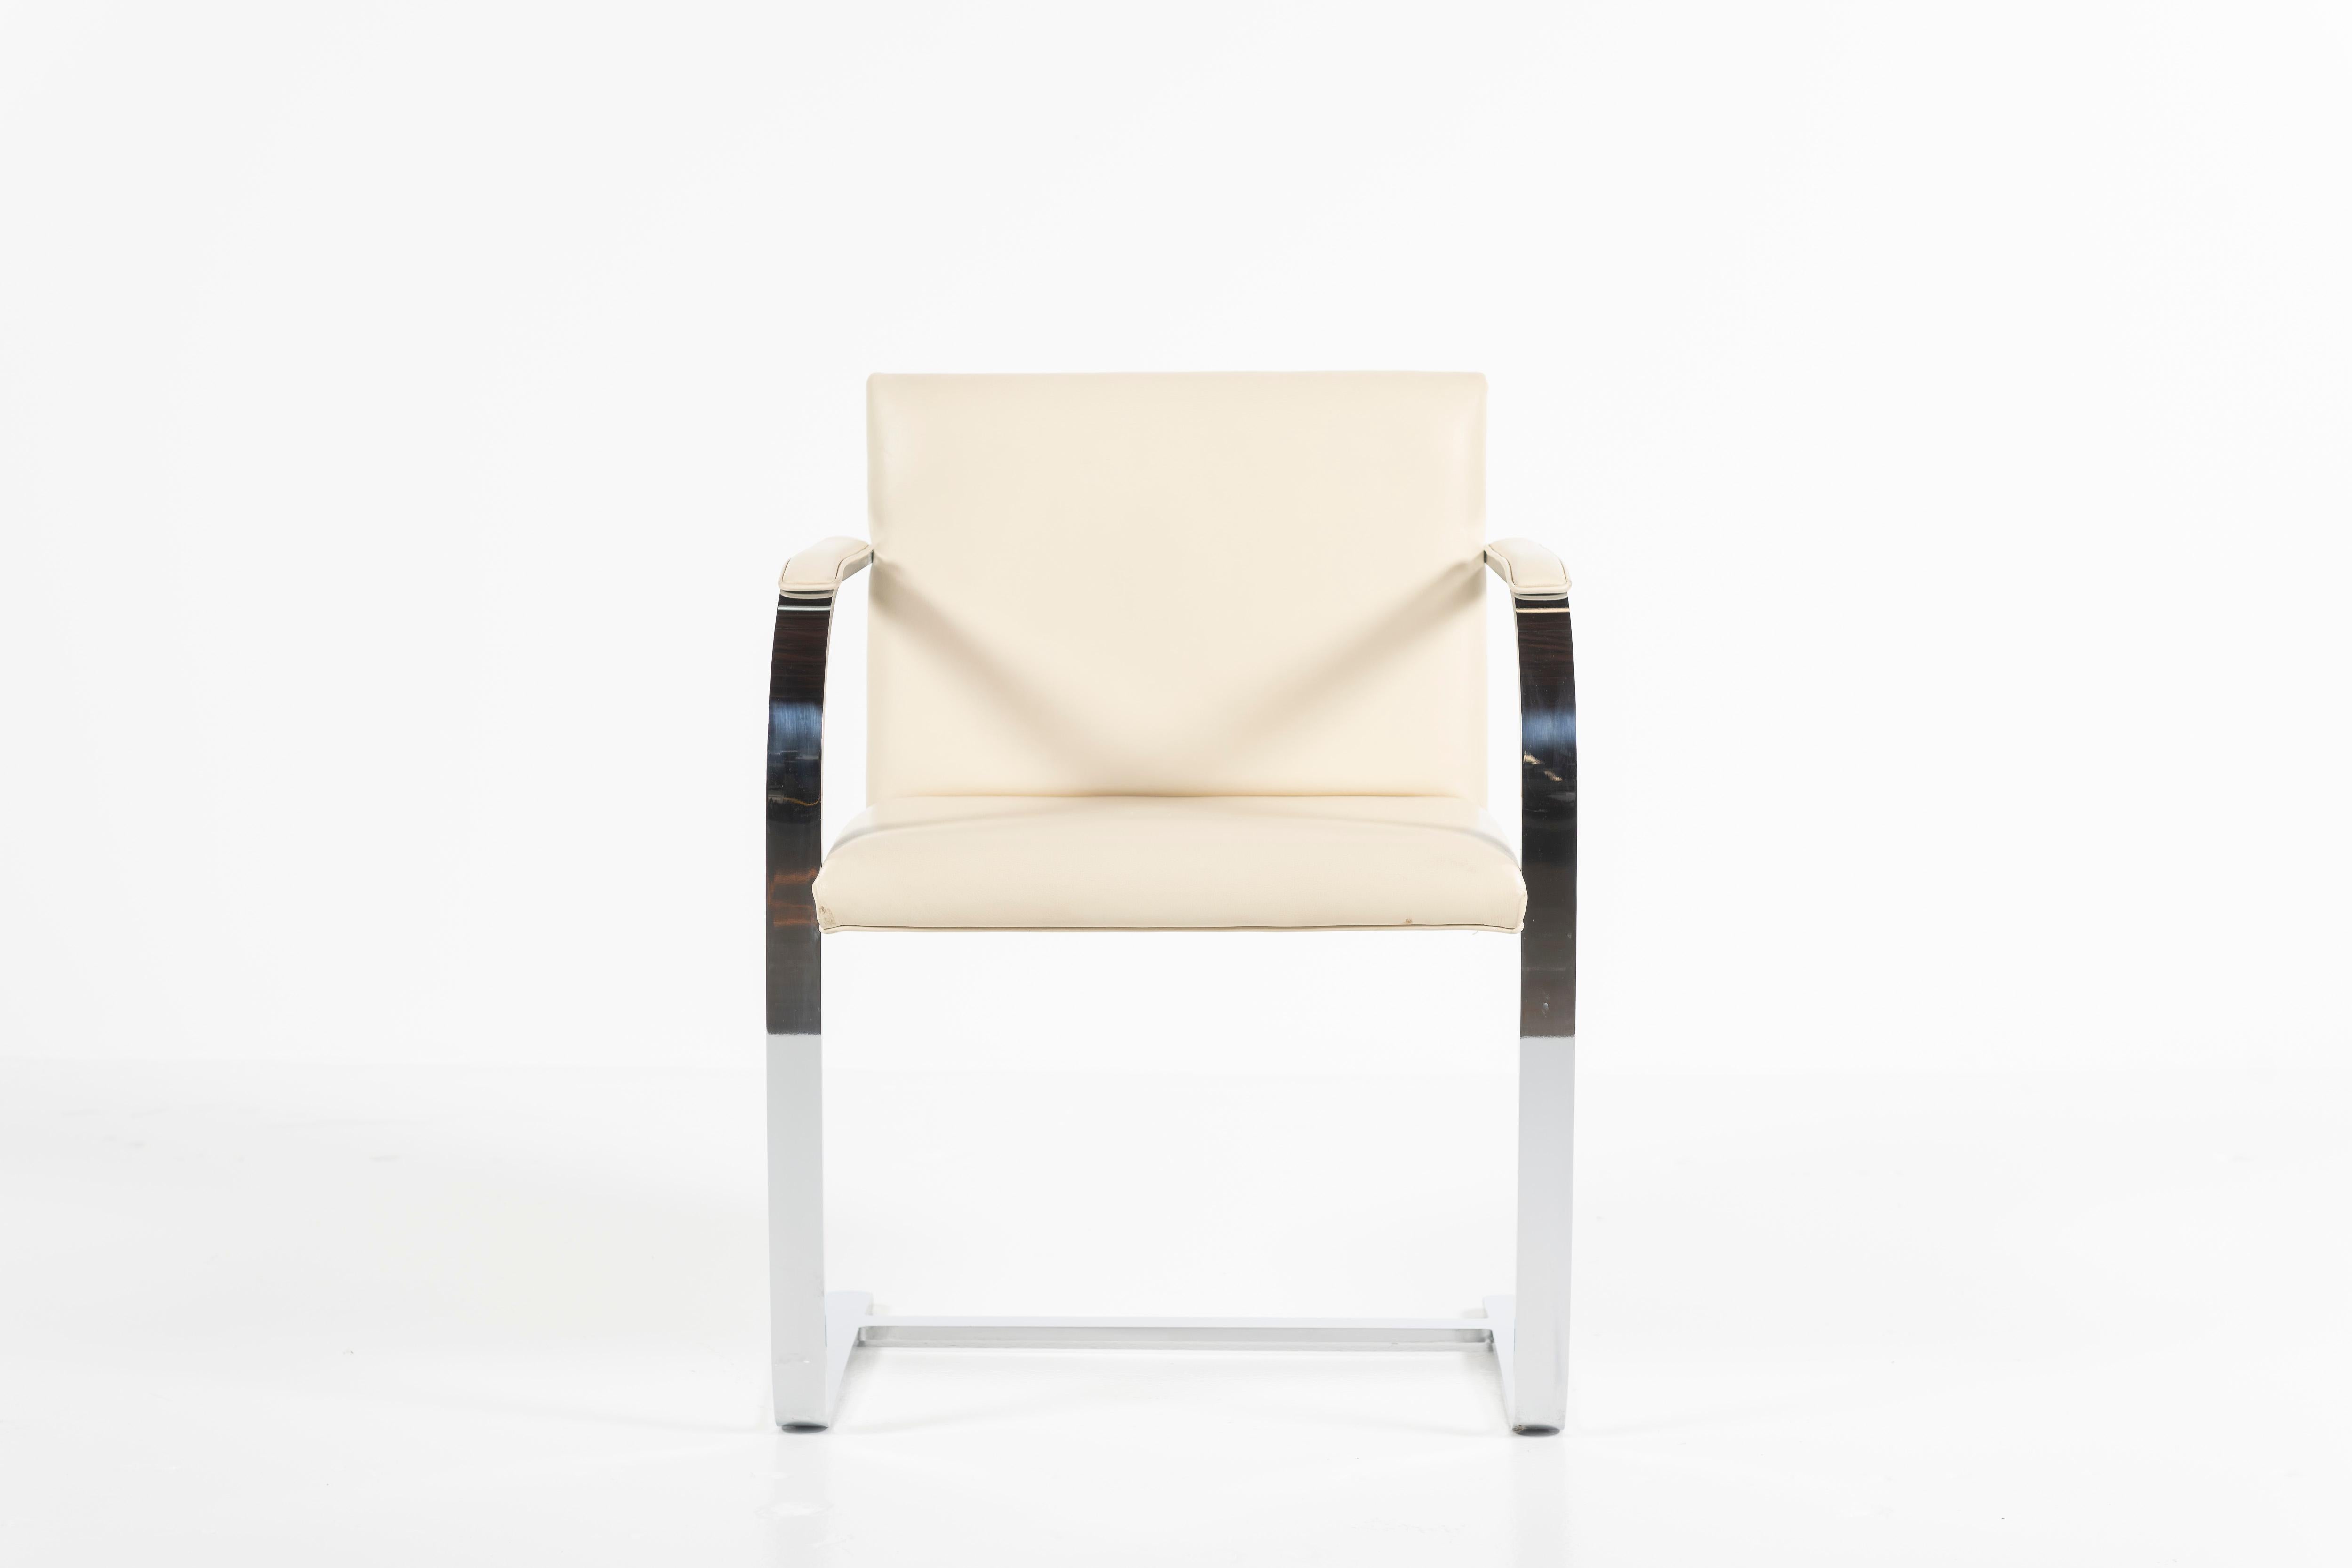 A modern, timeless classic, this chair has a perfect sense of proportion, as well as minimalist form and exquisitely refined details. The cantilevered base and padded arms support the ample seat. Chrome and leather, this piece is ready to place